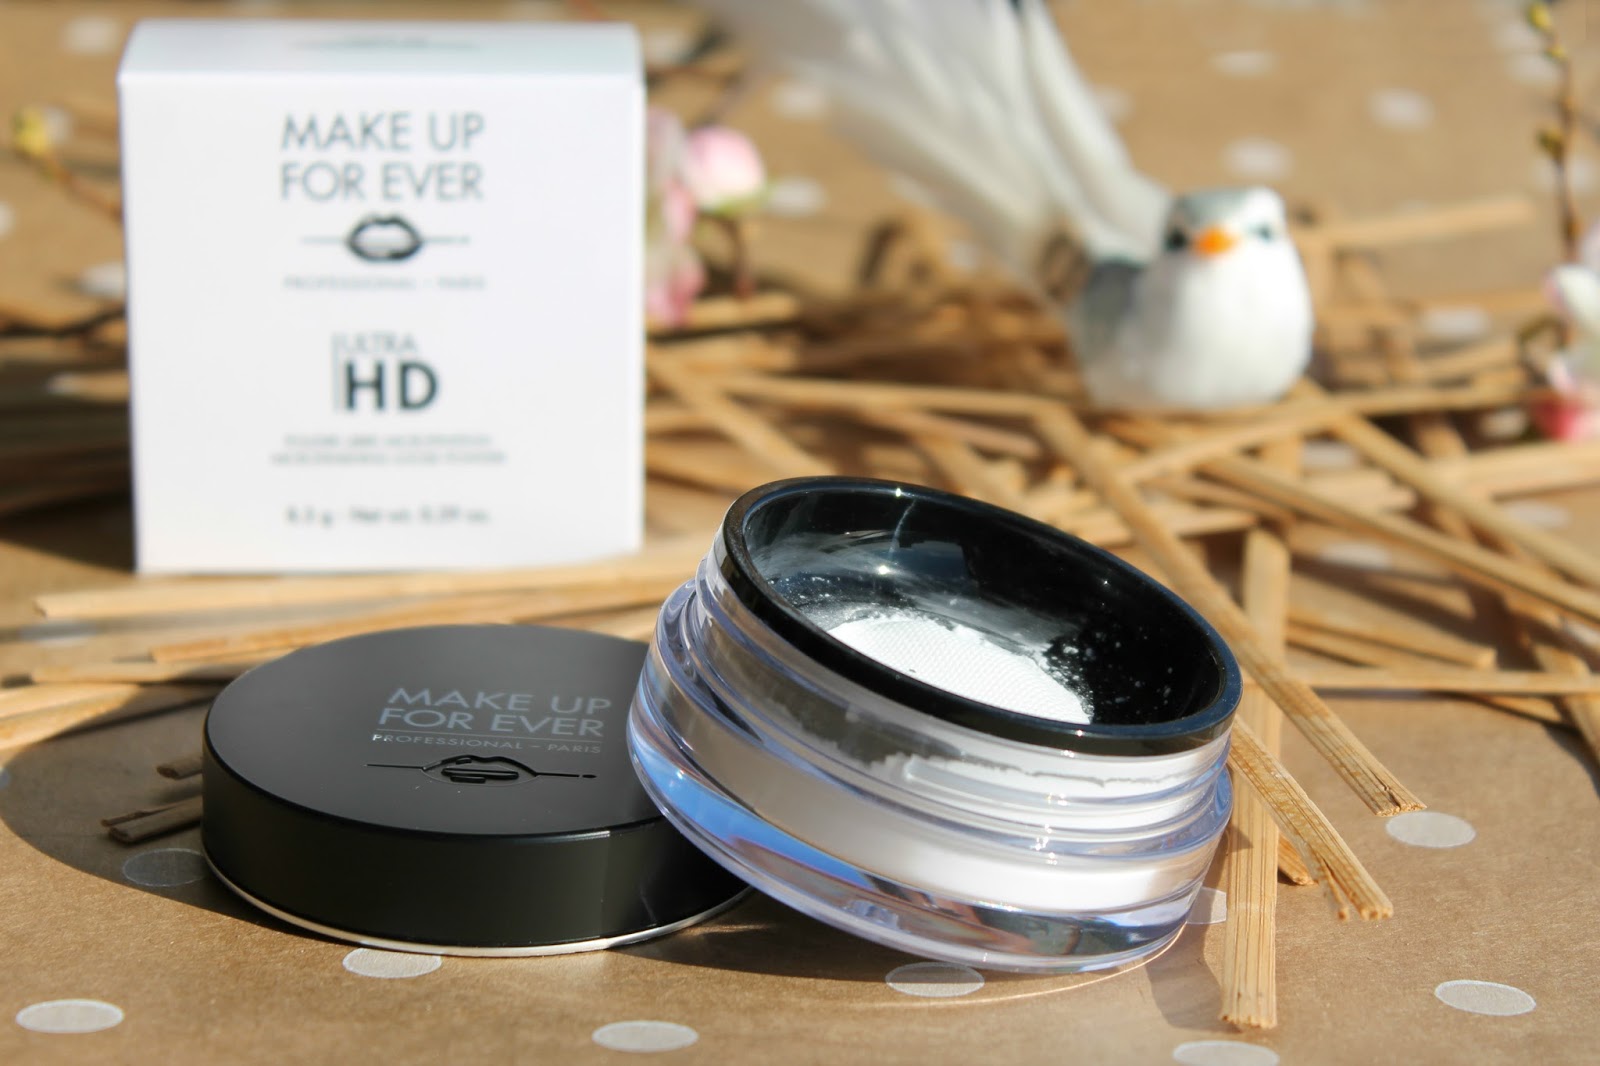 Makeup forever ultra hd loose powder review